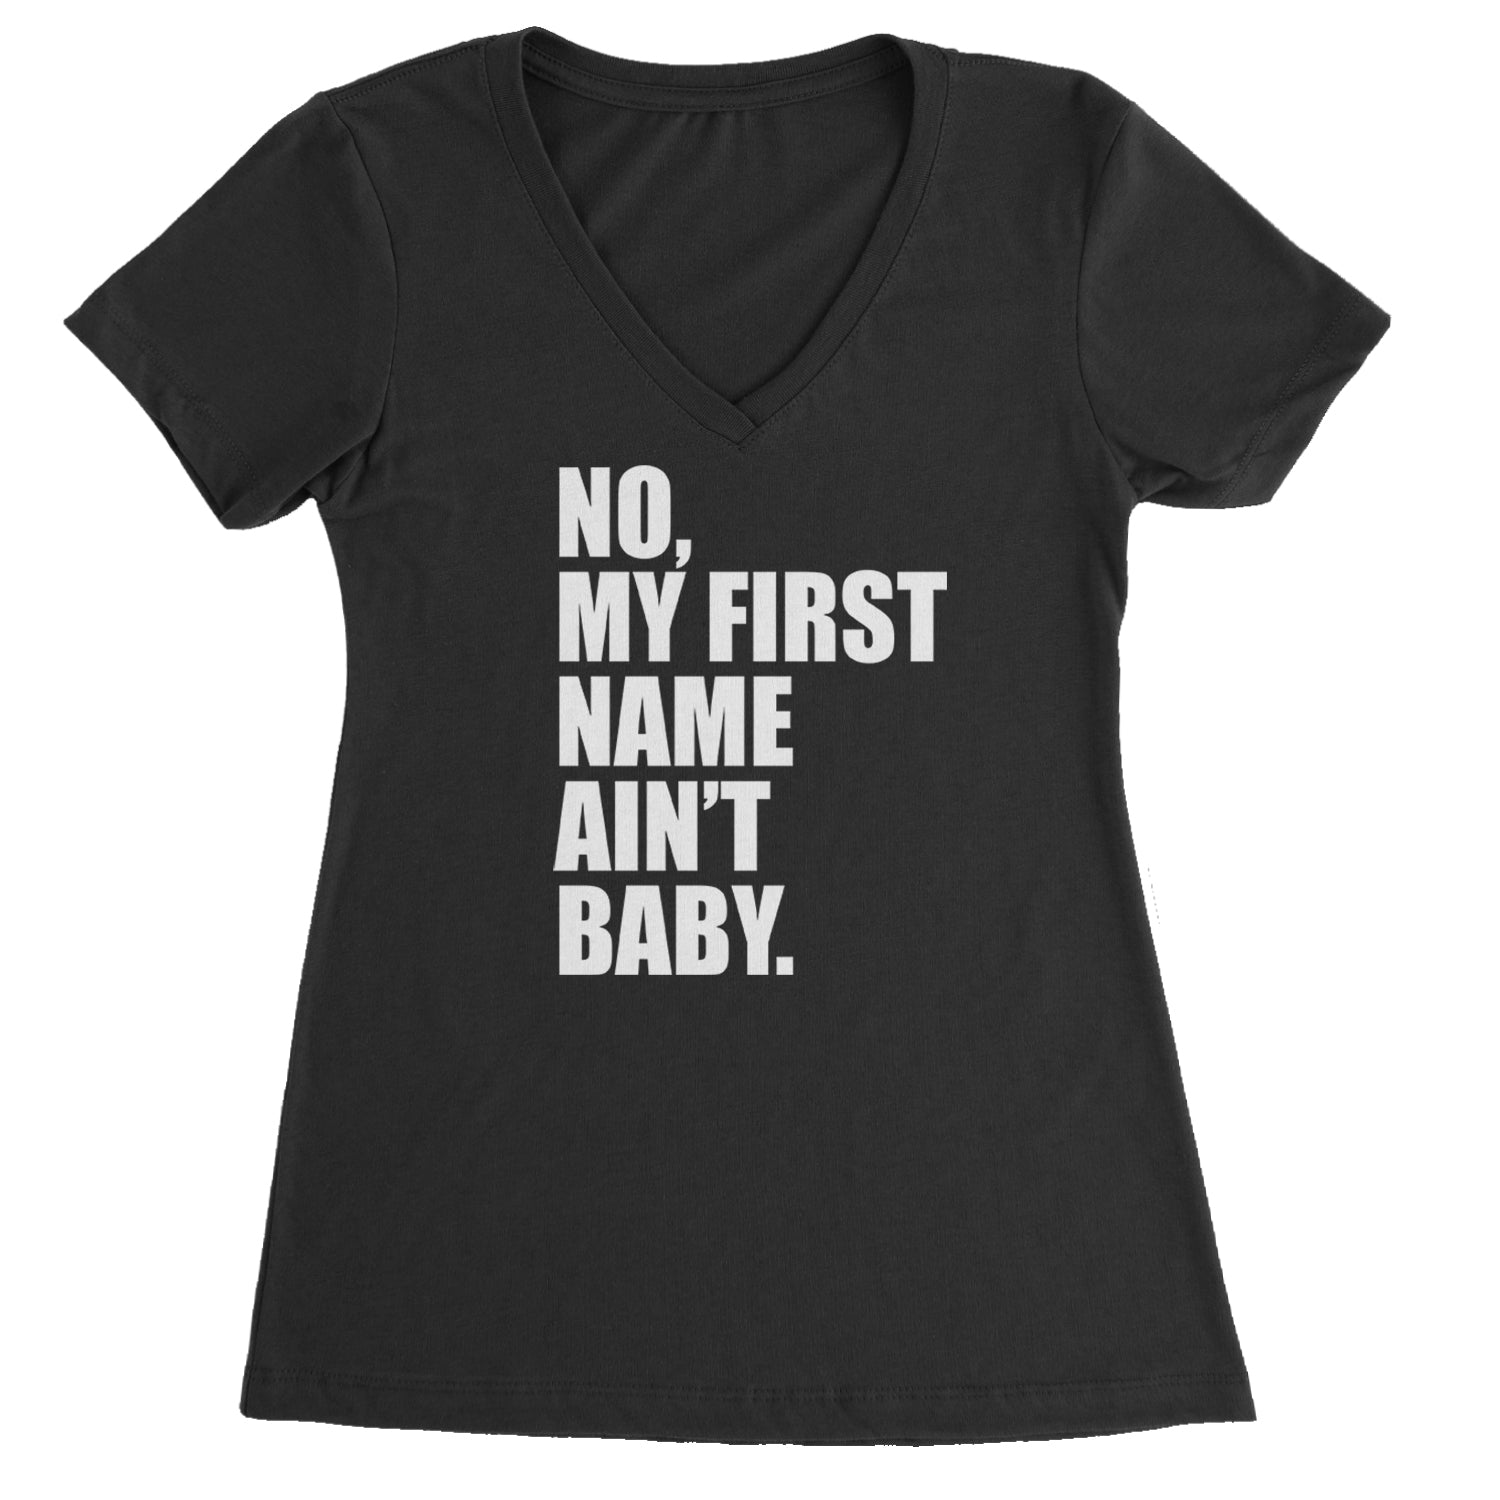 No My First Name Ain't Baby Together Again Ladies V-Neck T-shirt